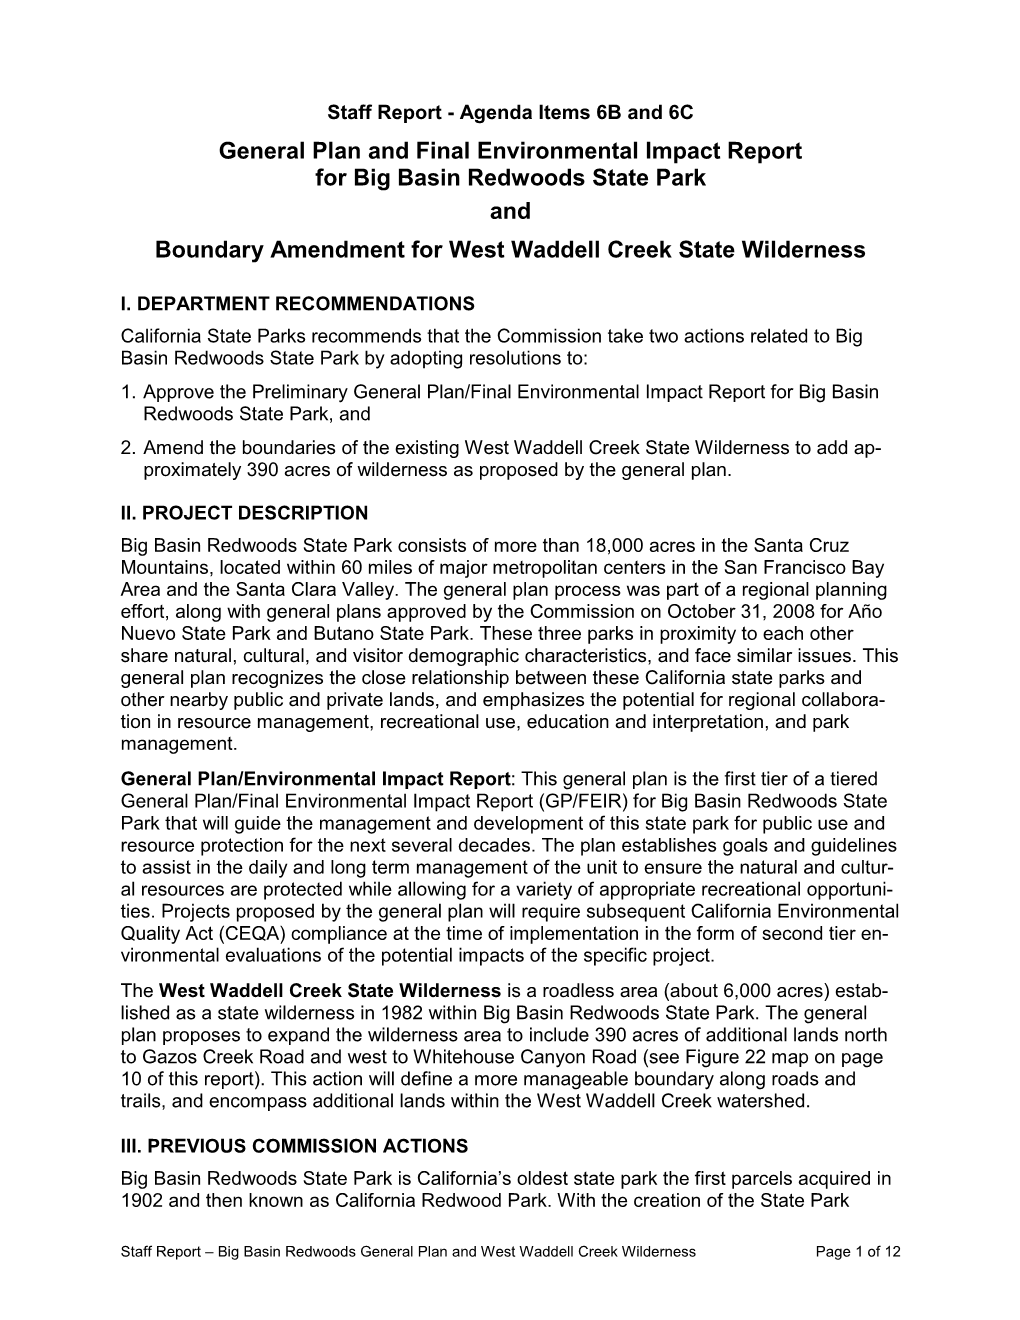 General Plan and Final Environmental Impact Report for Big Basin Redwoods State Park and Boundary Amendment for West Waddell Creek State Wilderness